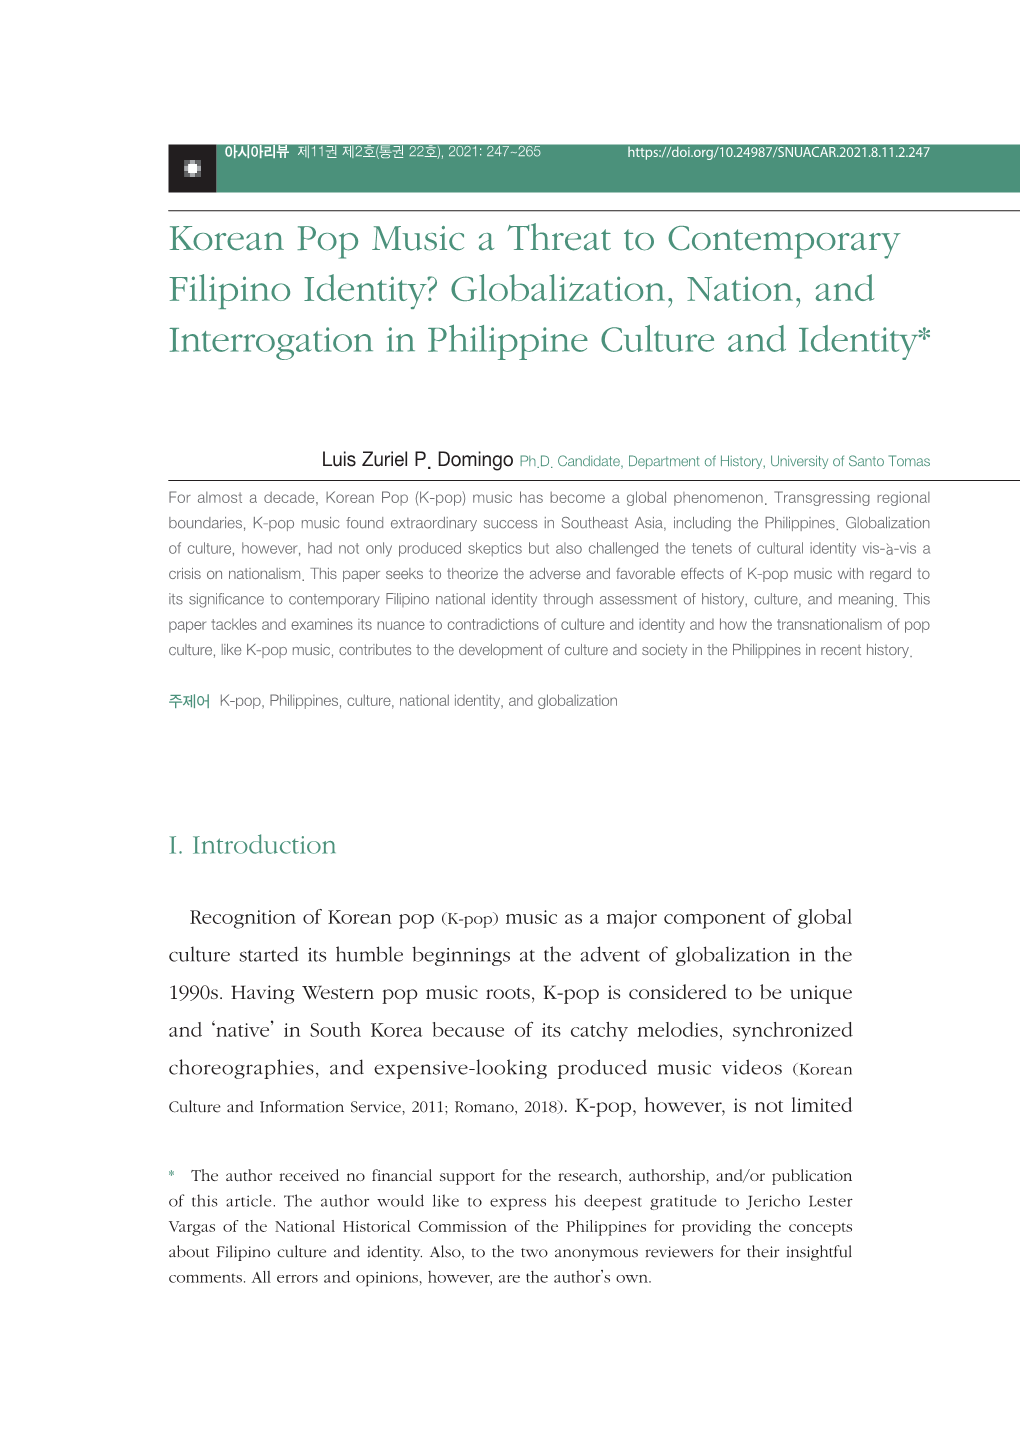 Korean Pop Music a Threat to Contemporary Filipino Identity? Globalization, Nation, and Interrogation in Philippine Culture and Identity*